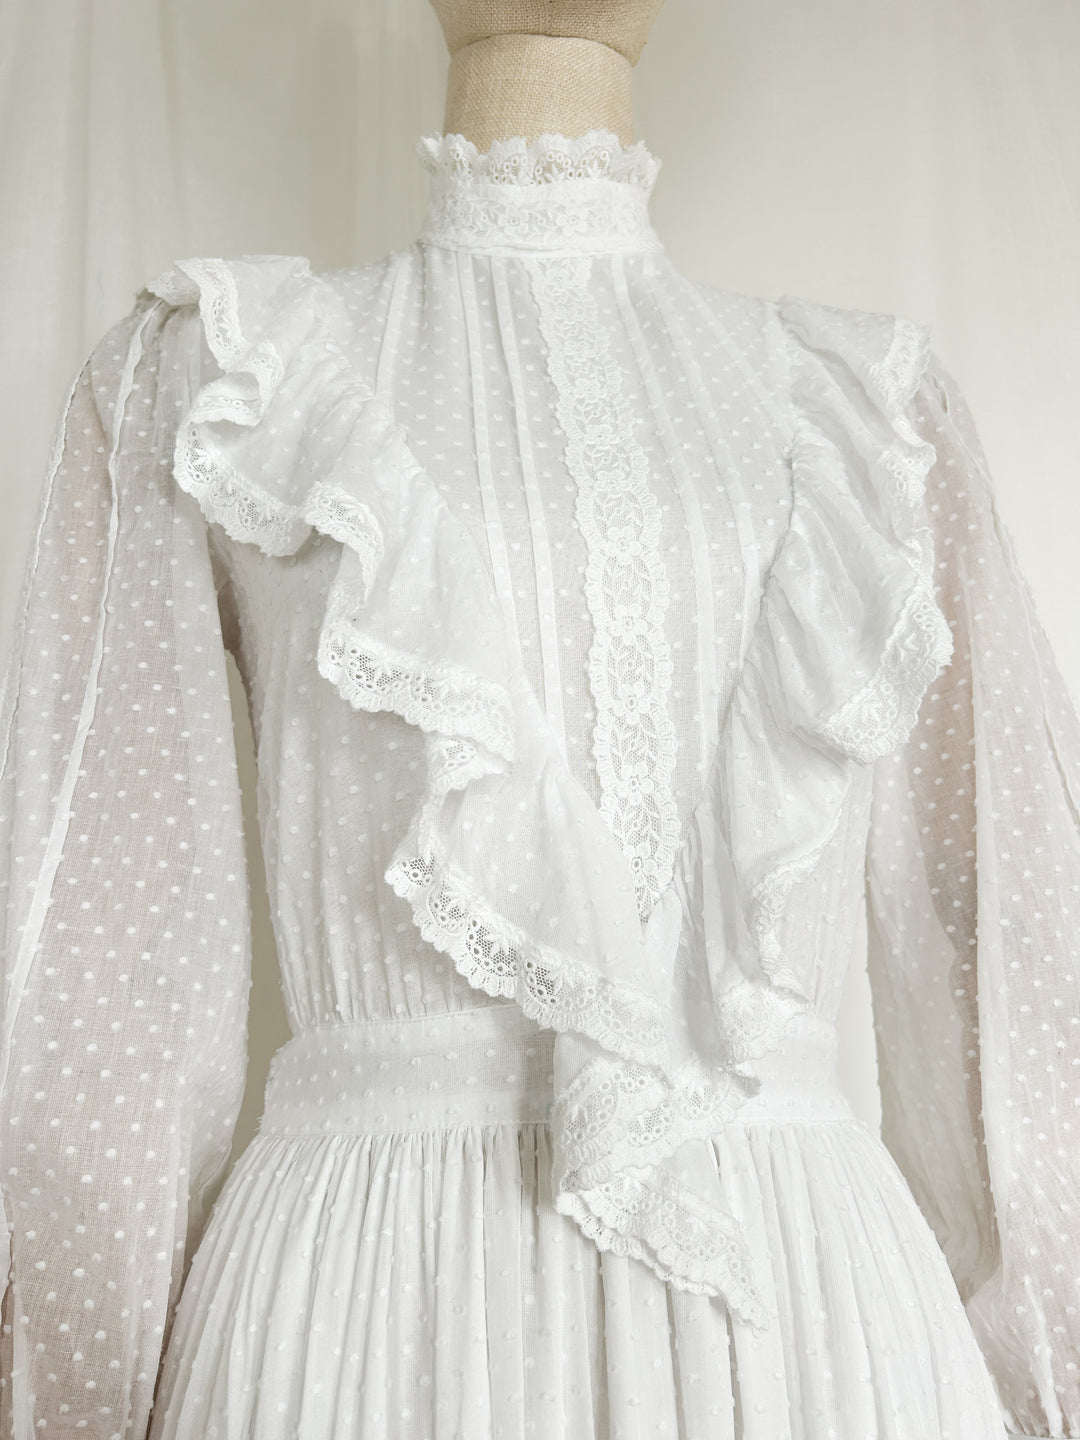 RARE LATE 1970S LAURA ASHLEY COTTON VOILE WEDDING GOWN